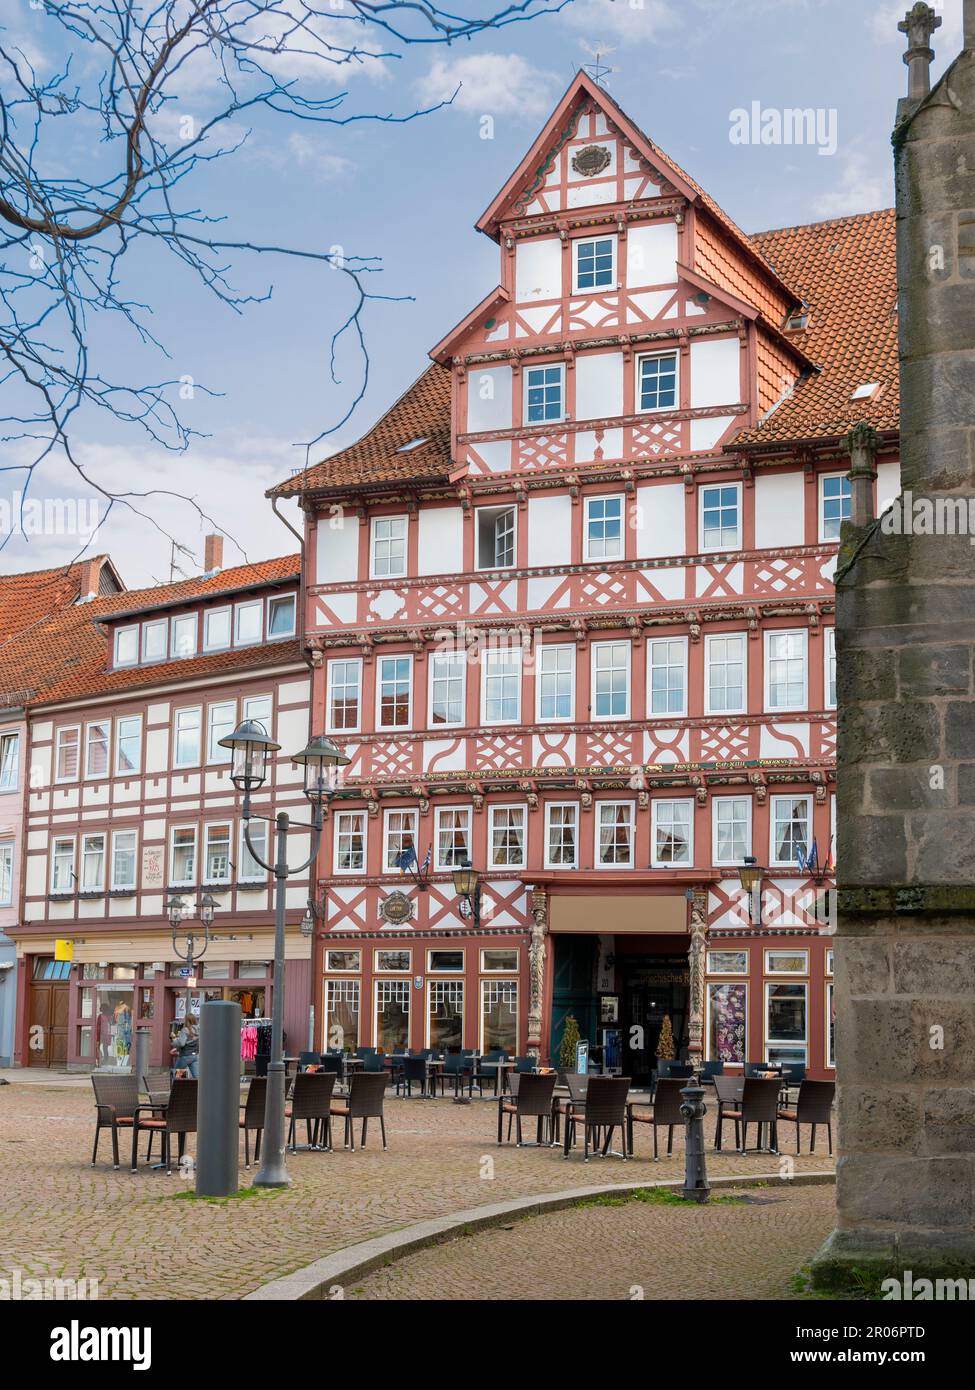 Historic half-timbered house in the old town Duderstadt, Germany Stock Photo